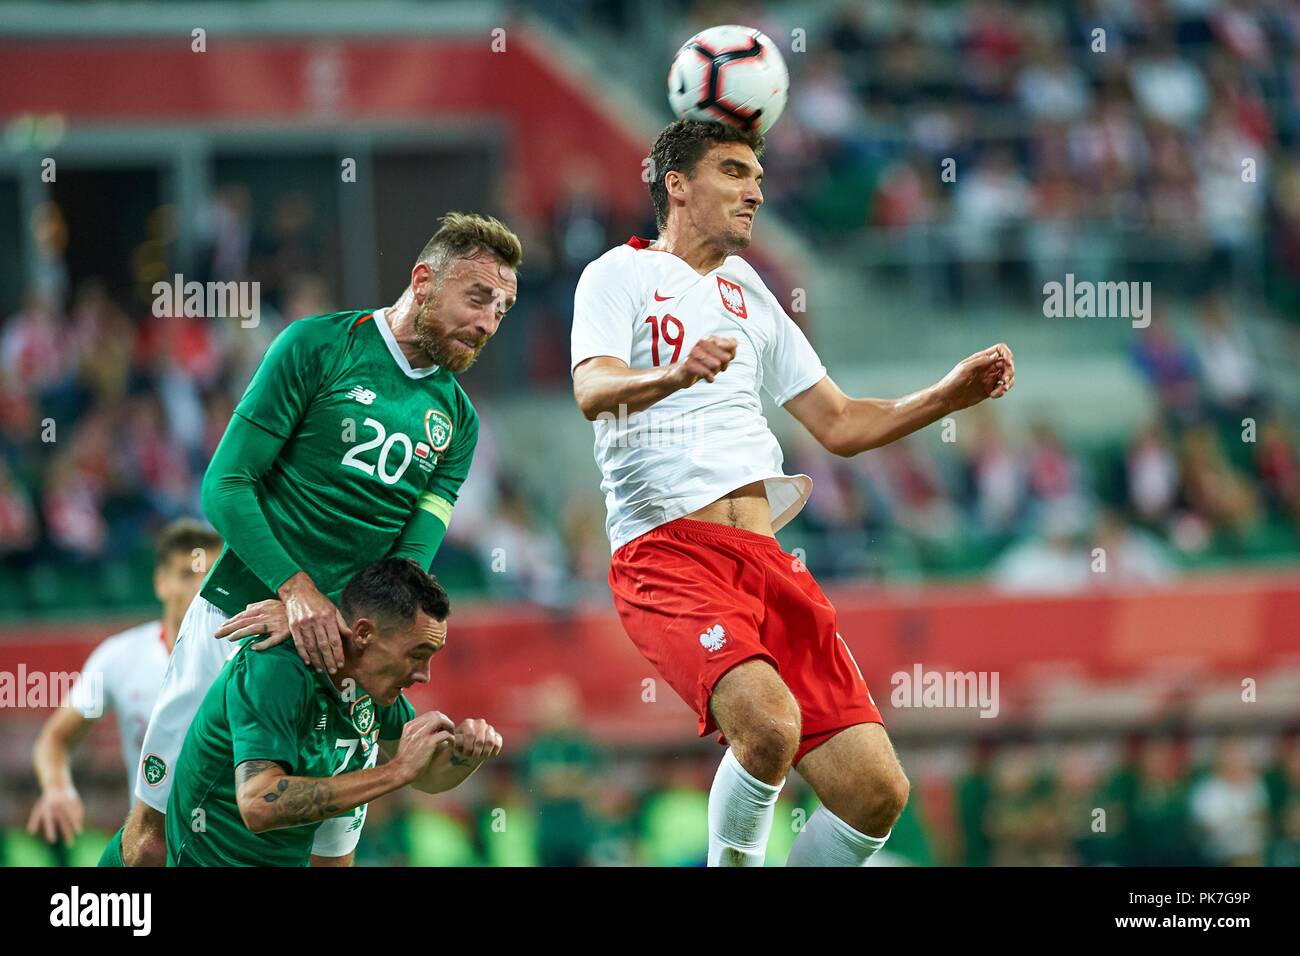 Wroclaw, Poland. 11th September 2018. Friendly game Poland v Republic of Ireland on September 11, 2018 in Wroclaw, Poland. In the picture: Richard Keogh, Marcin Kaminski Credit: East News sp. z o.o./Alamy Live News Stock Photo